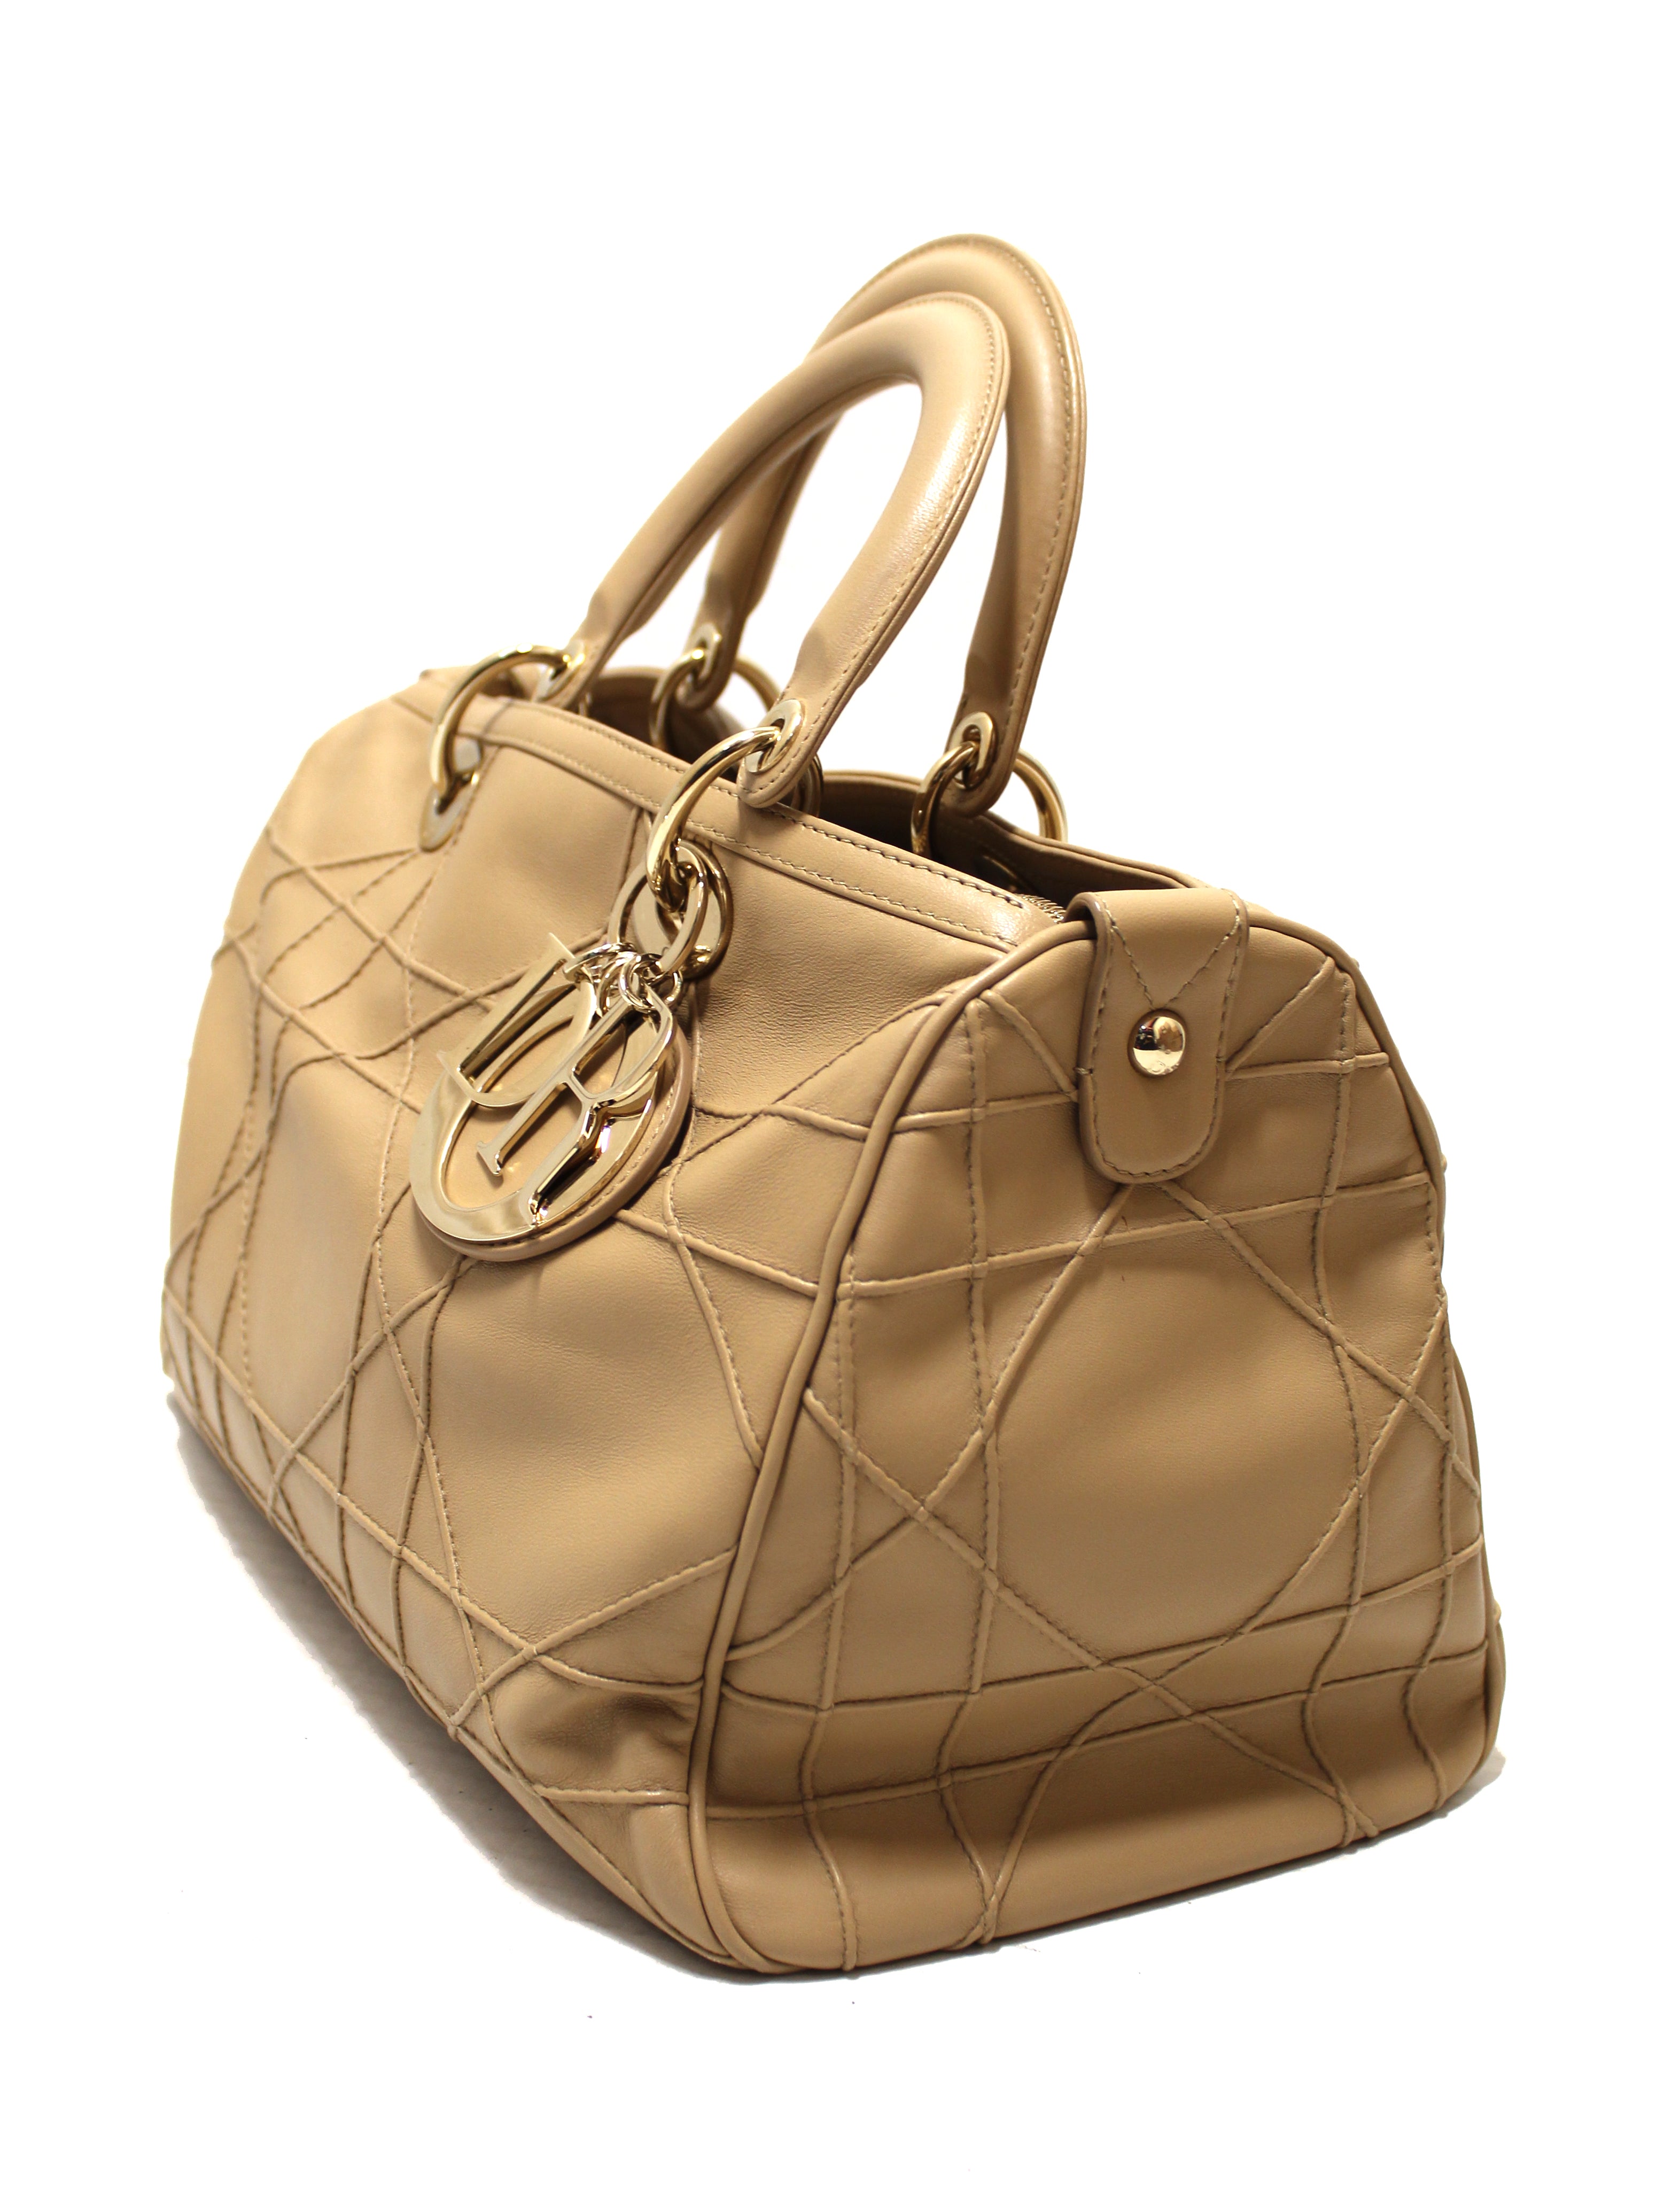 Authentic Christian Dior Large Quilted Camel Cannage Granville Polochon Satchel Hand Bag